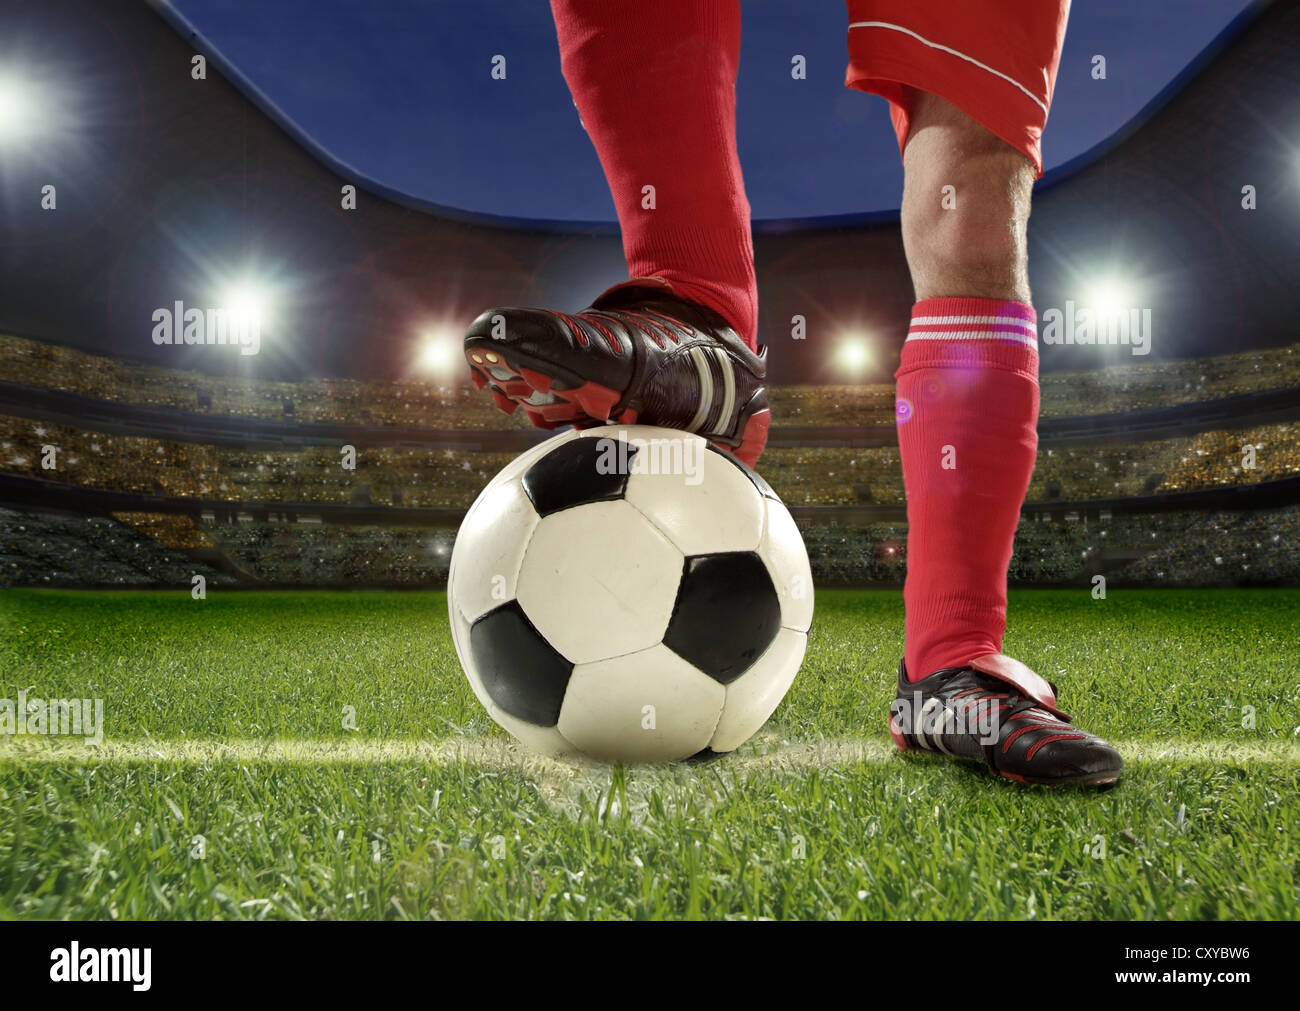 Football player, detail of legs, holding the ball with his foot in a football stadium Stock Photo